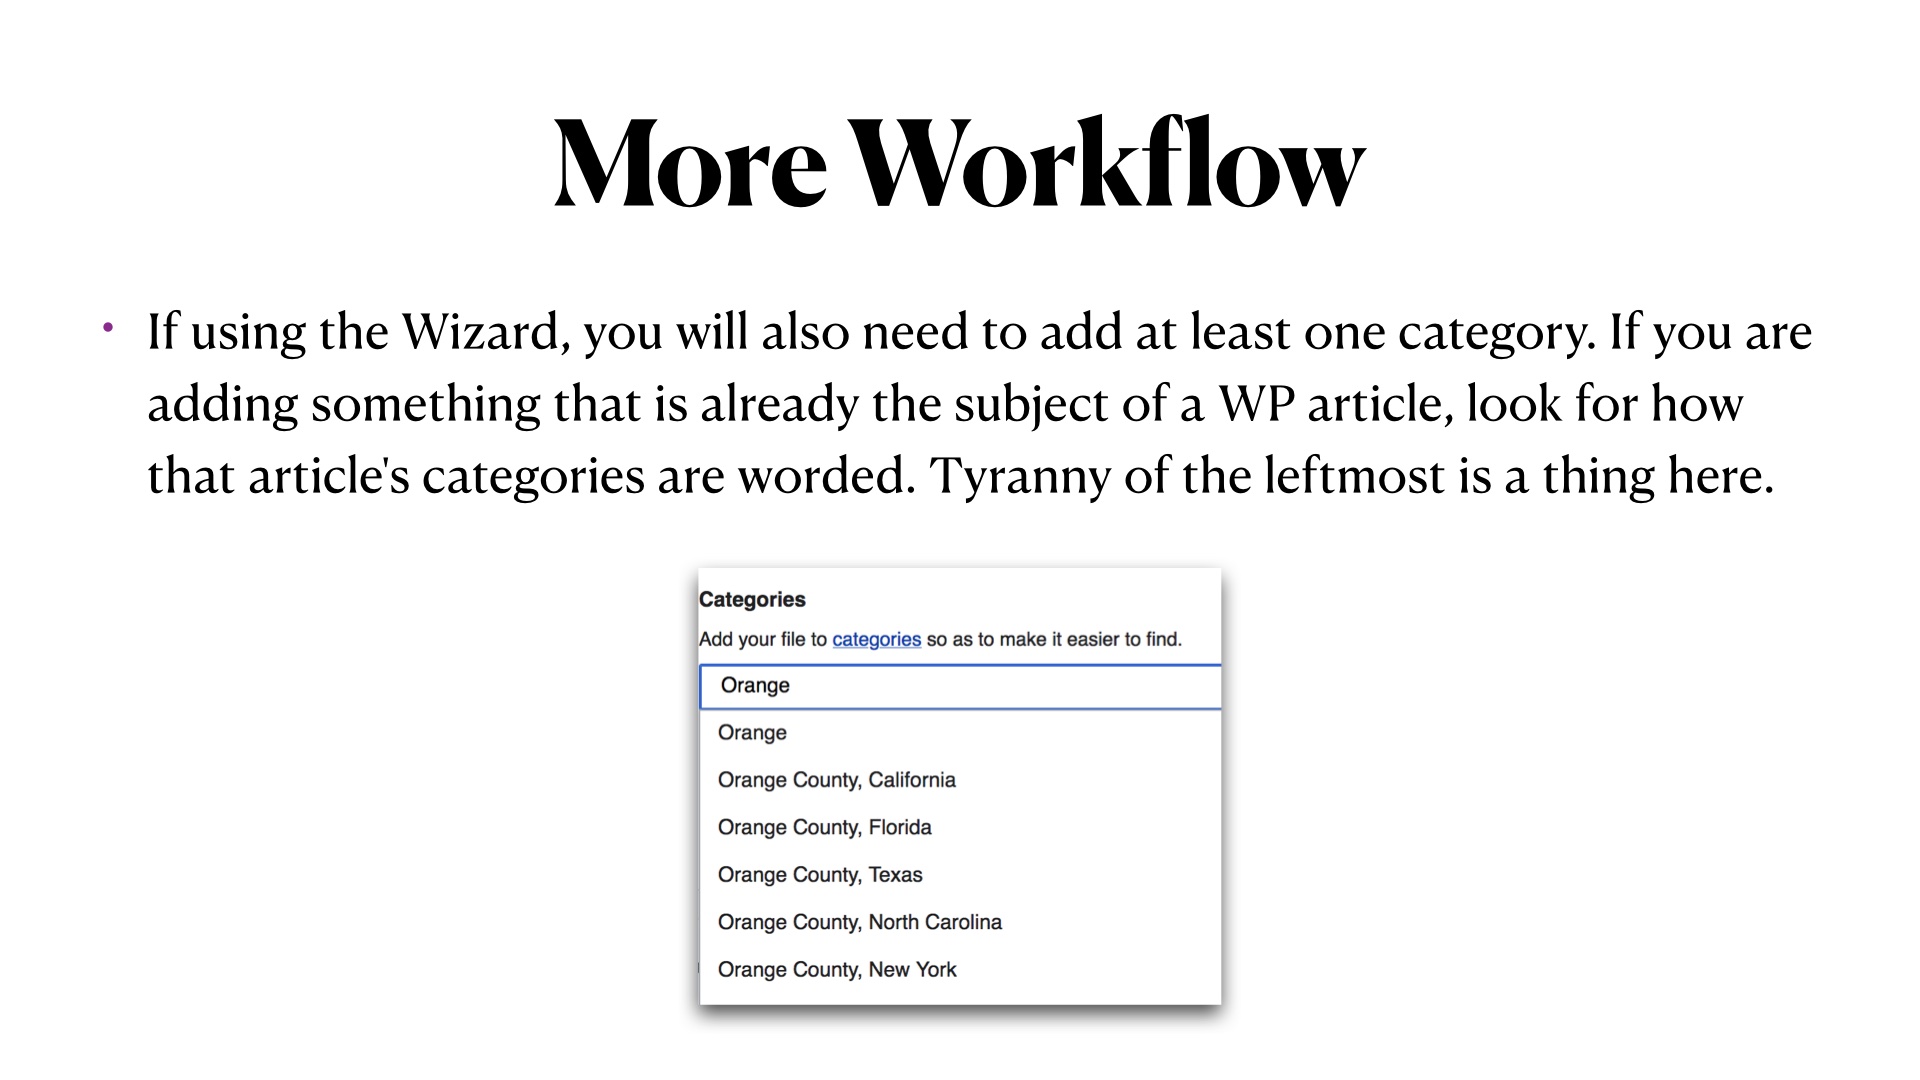 More Workflow. If using the Wizard, you will also need to add at least one category. If you are adding something that is already the subject of a WP article, look for how that article's categories are worded. Tyranny of the leftmost is a thing here. Screenshot of a category search for 